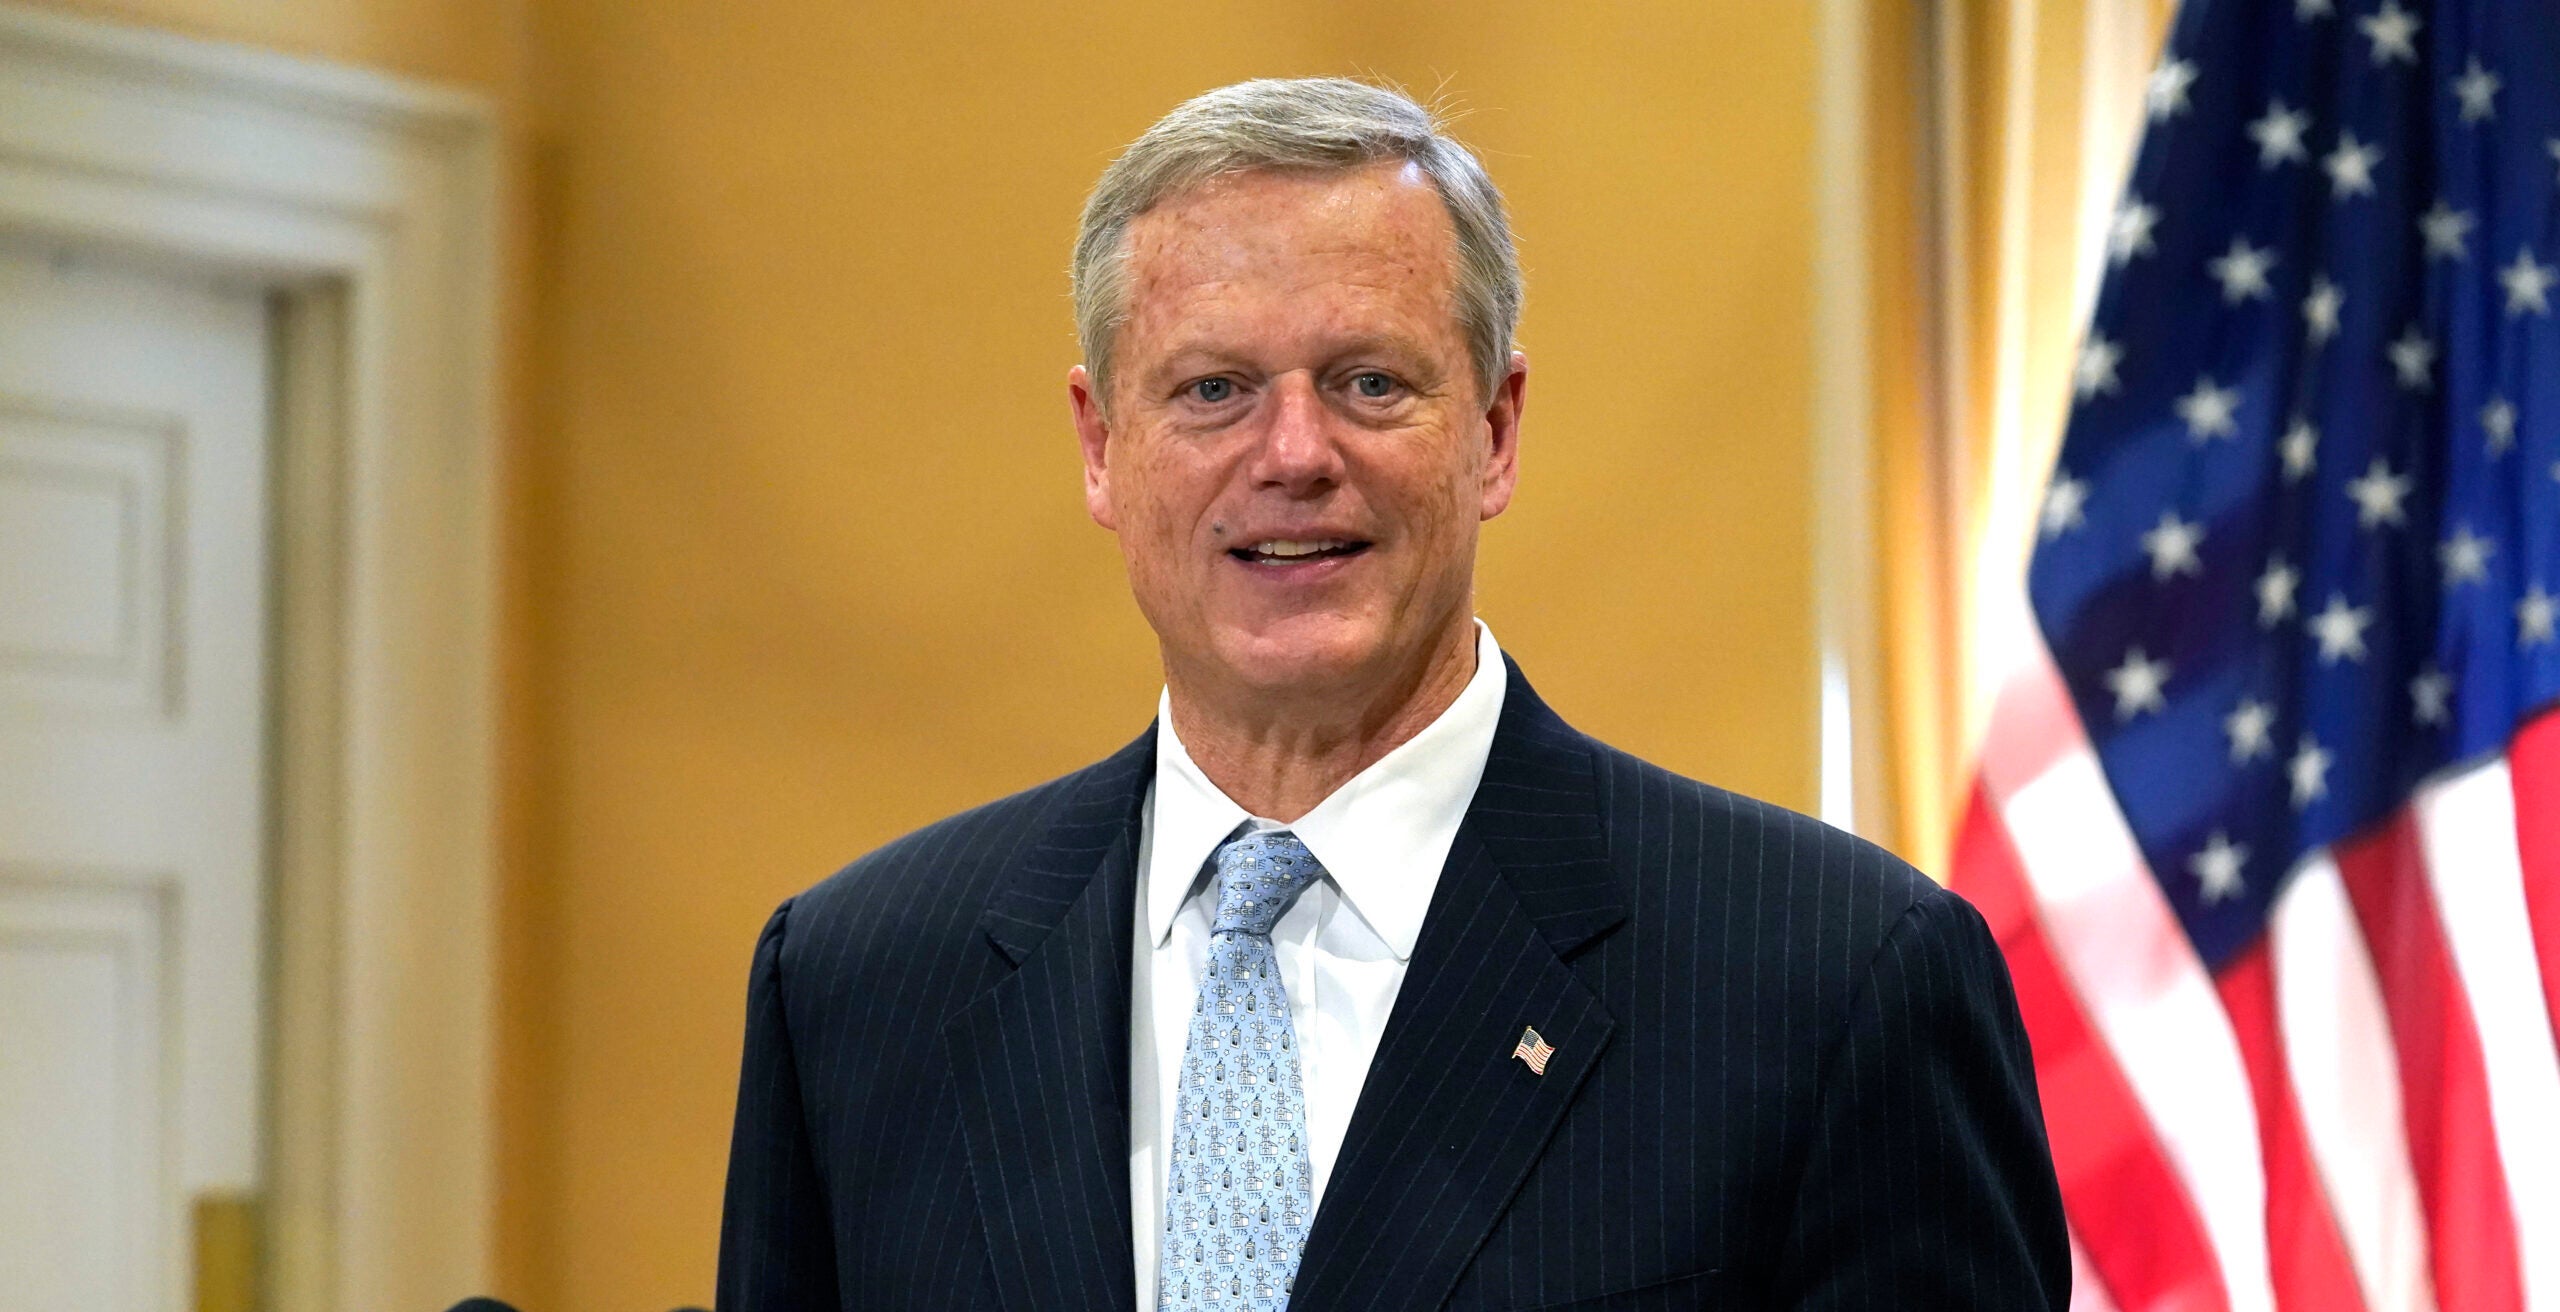 Gov. Charlie Baker speaks with reporters during a news conference Nov. 9 at the State House in Boston.